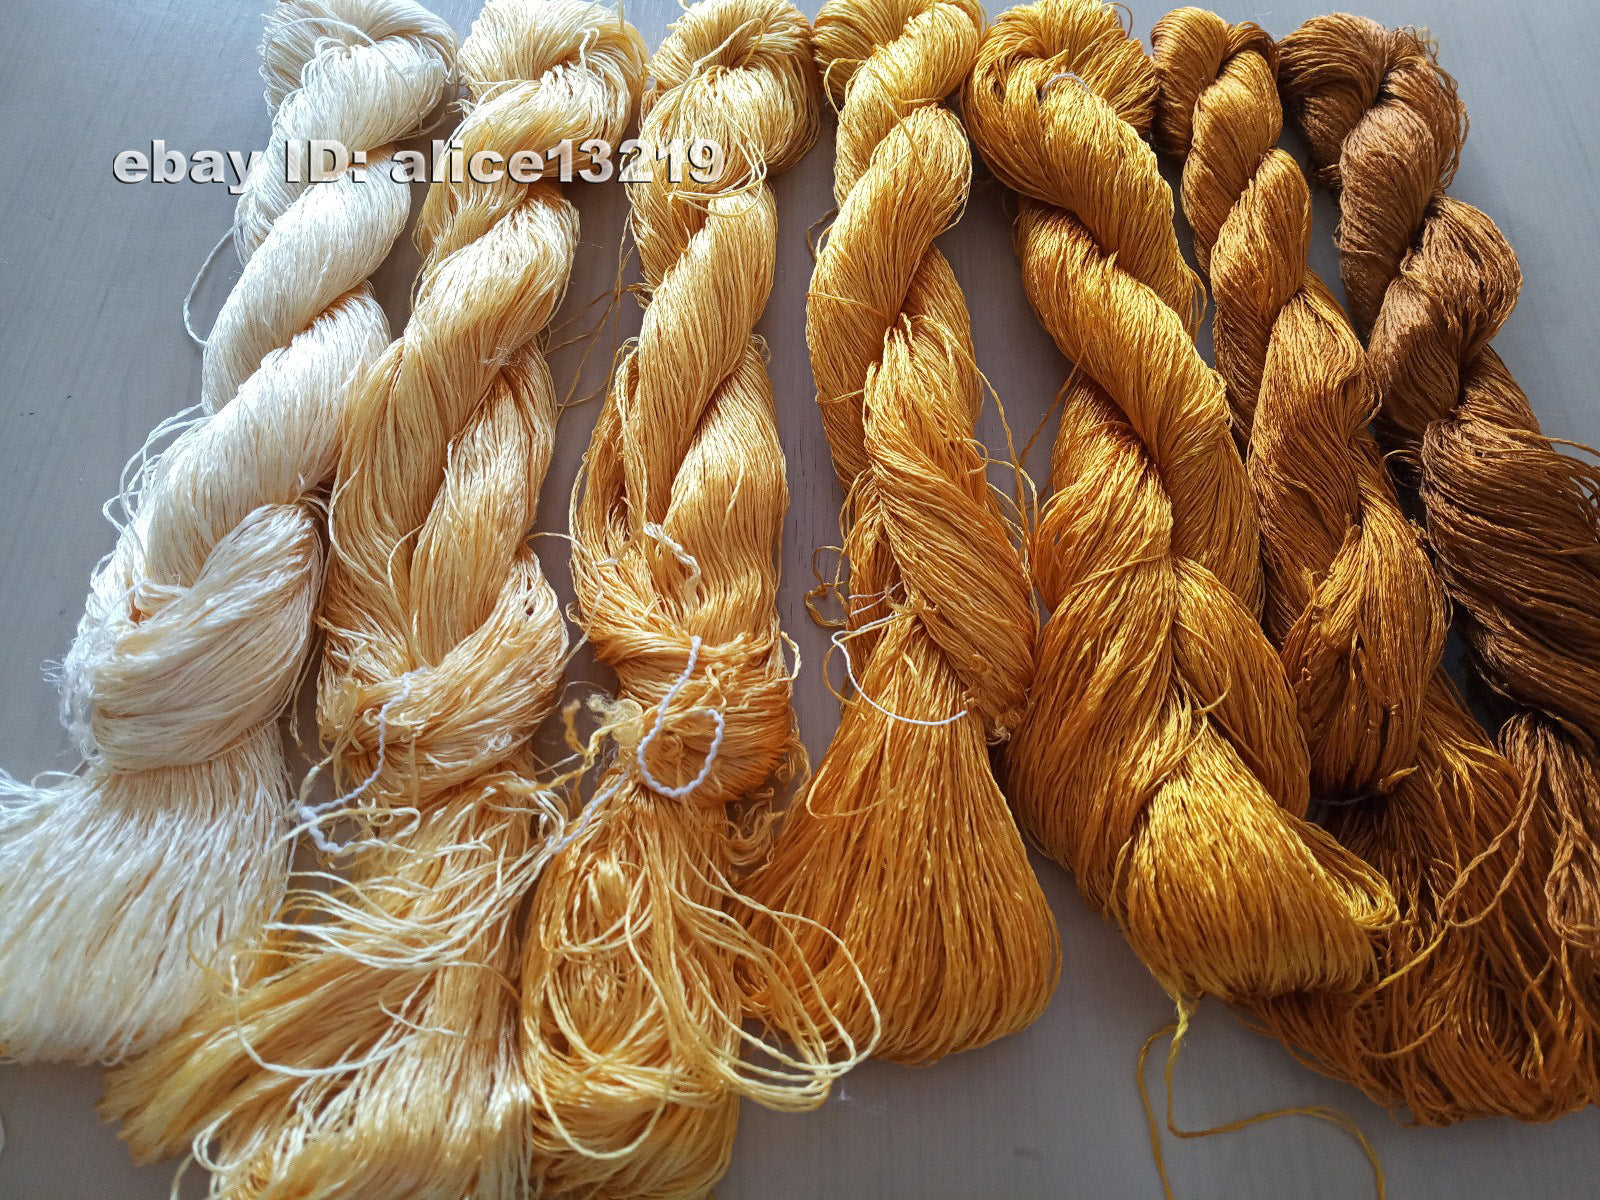 100% Natural Mulberry Silk Embroidery Thread Floss Cross Stitch